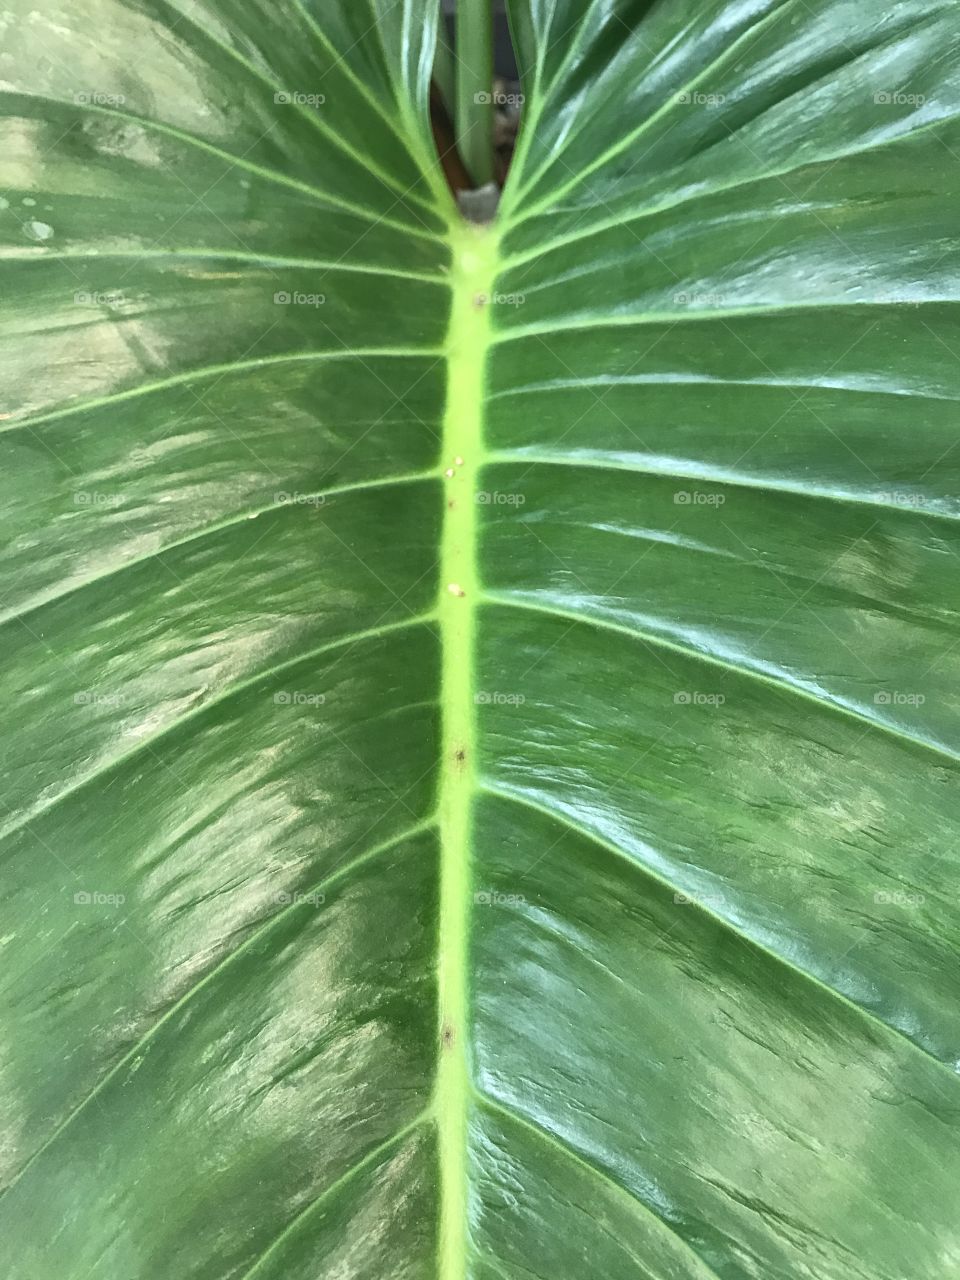 close-up shot of big green leaf vein of giant taro plant in full frame, using for background